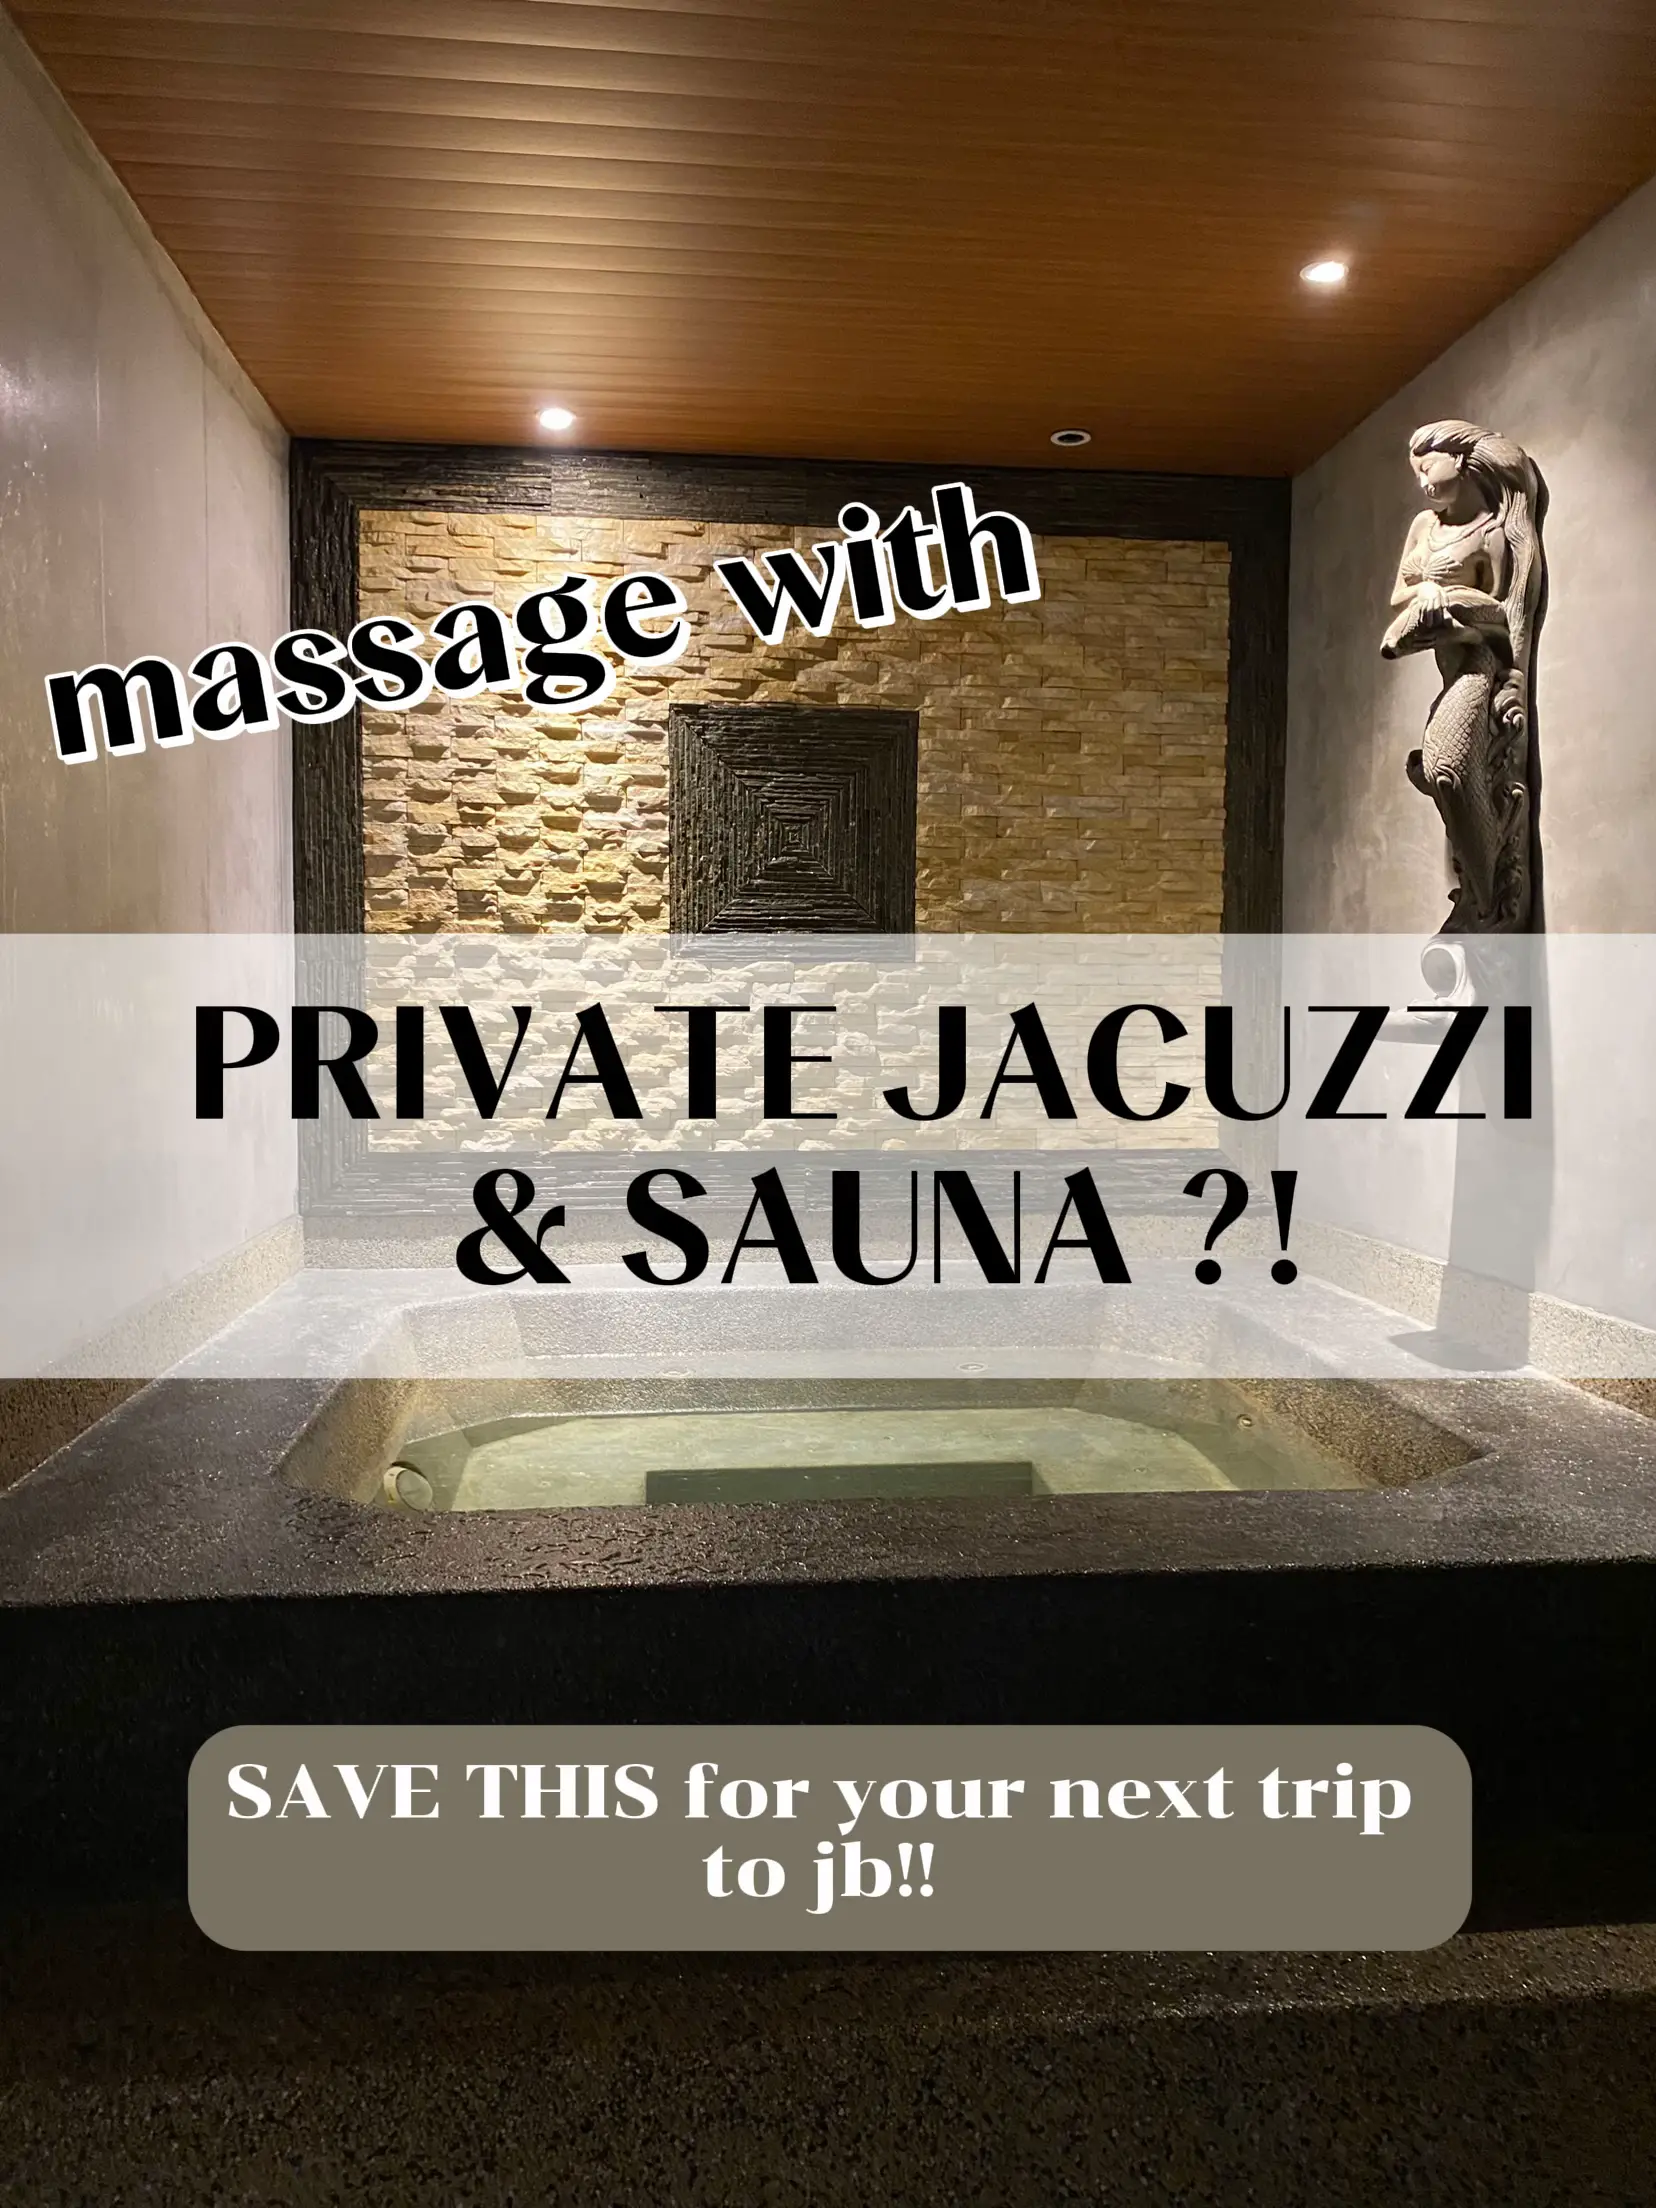 massage with PRIVATE JACCUZI & SAUNA in jb?!?!'s images(0)